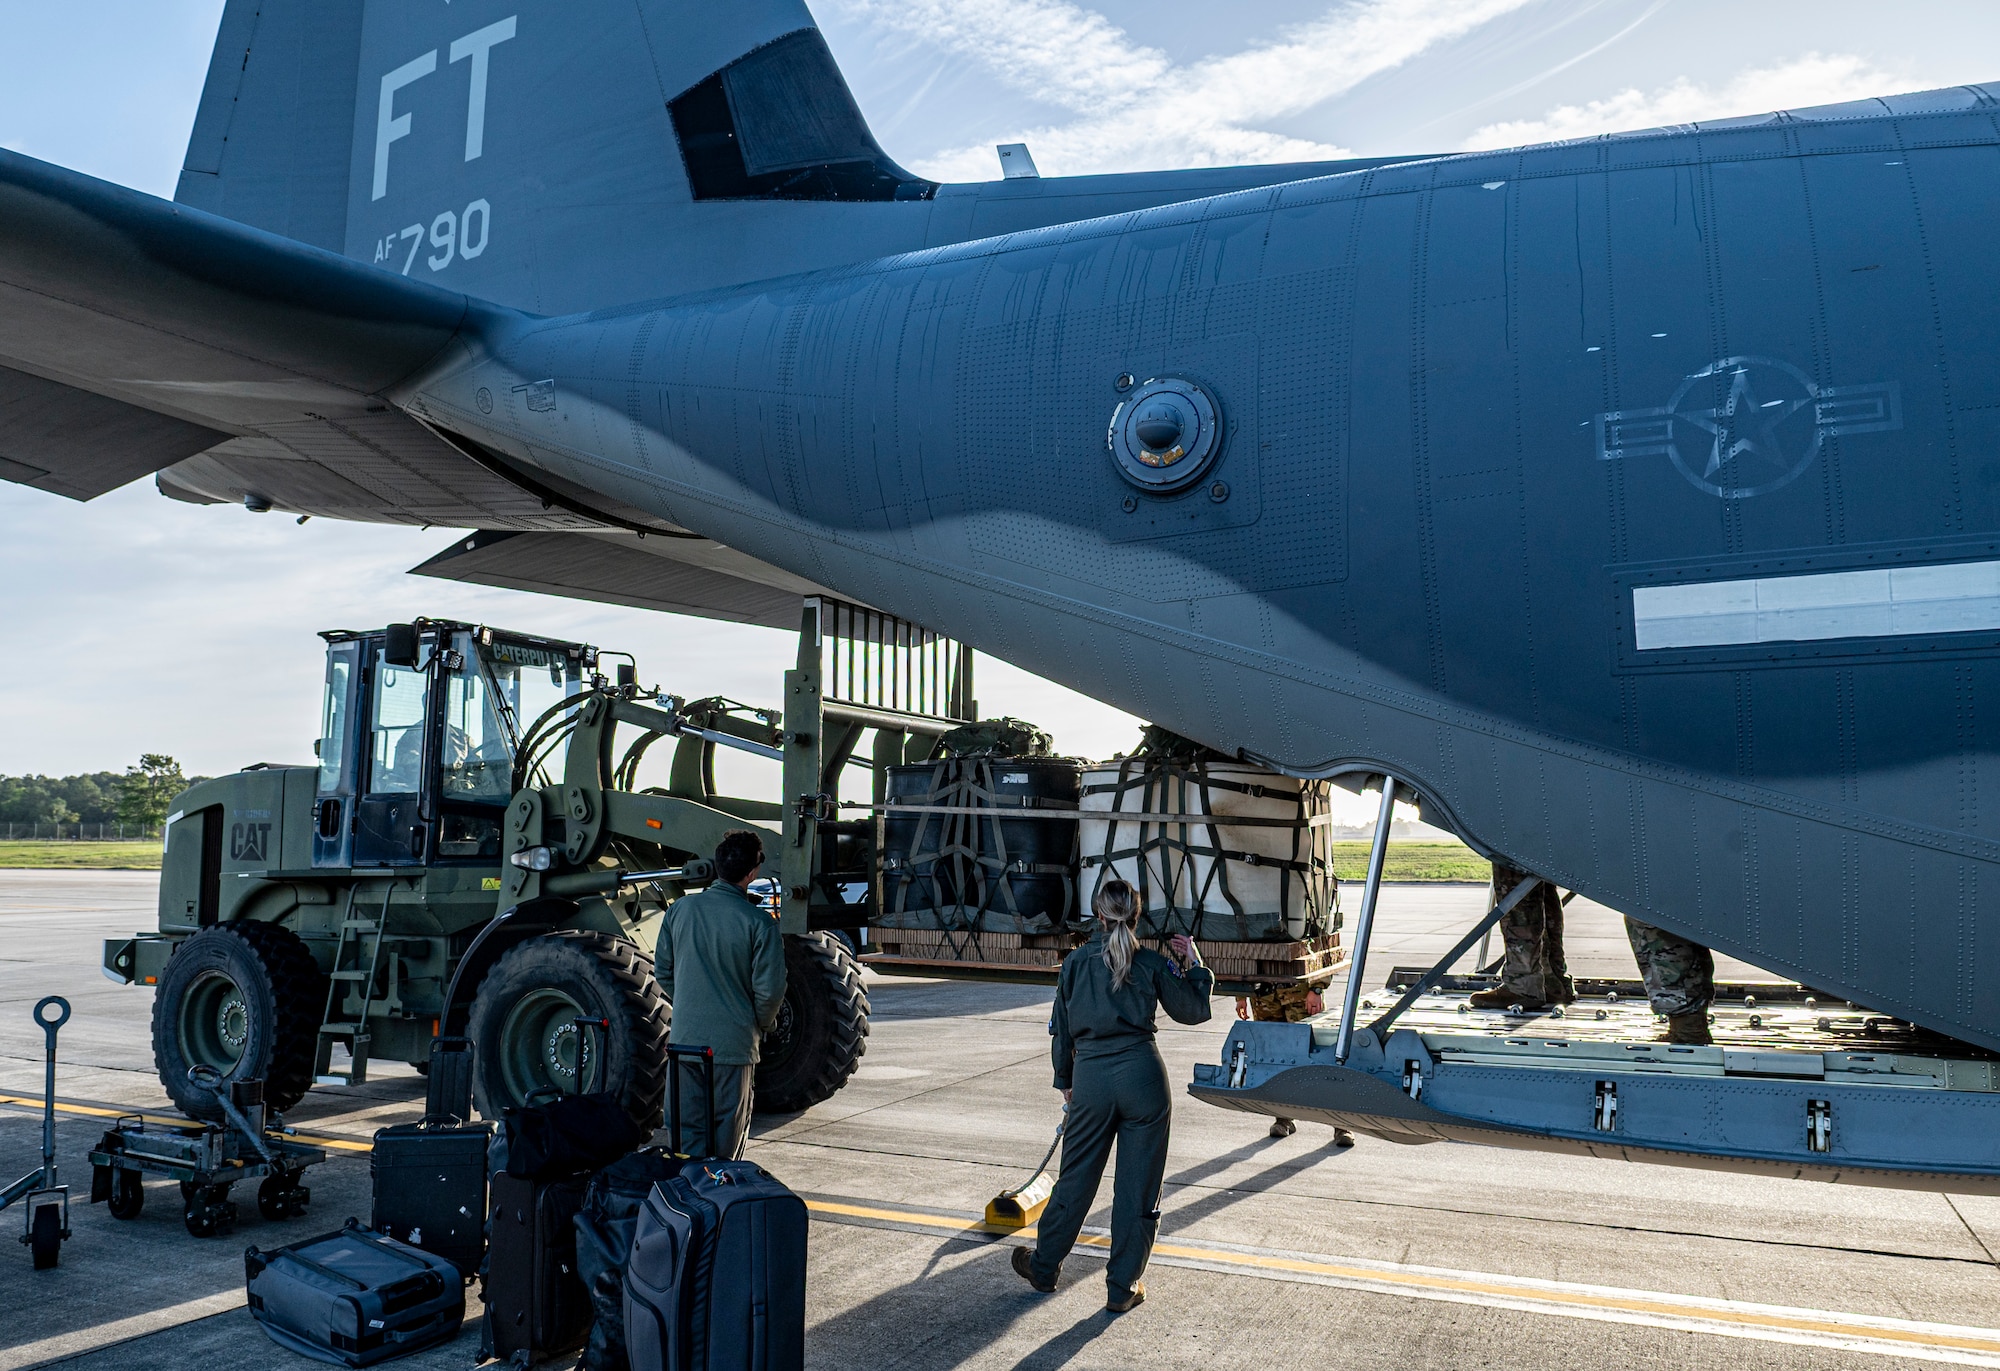 U.S. Air Force Airmen assigned to the 23rd Wing, load cargo into an HC-130J Combat King II at Moody Air Force Base, Georgia, March 25, 2024. After loading the aircraft, the Airmen traveled to Salina, Kansas, for the Rescue Rodeo, a rescue training event and competition organized by the 71st Rescue Squadron.  (U.S. Air Force photo by Airman 1st Class Leonid Soubbotine)